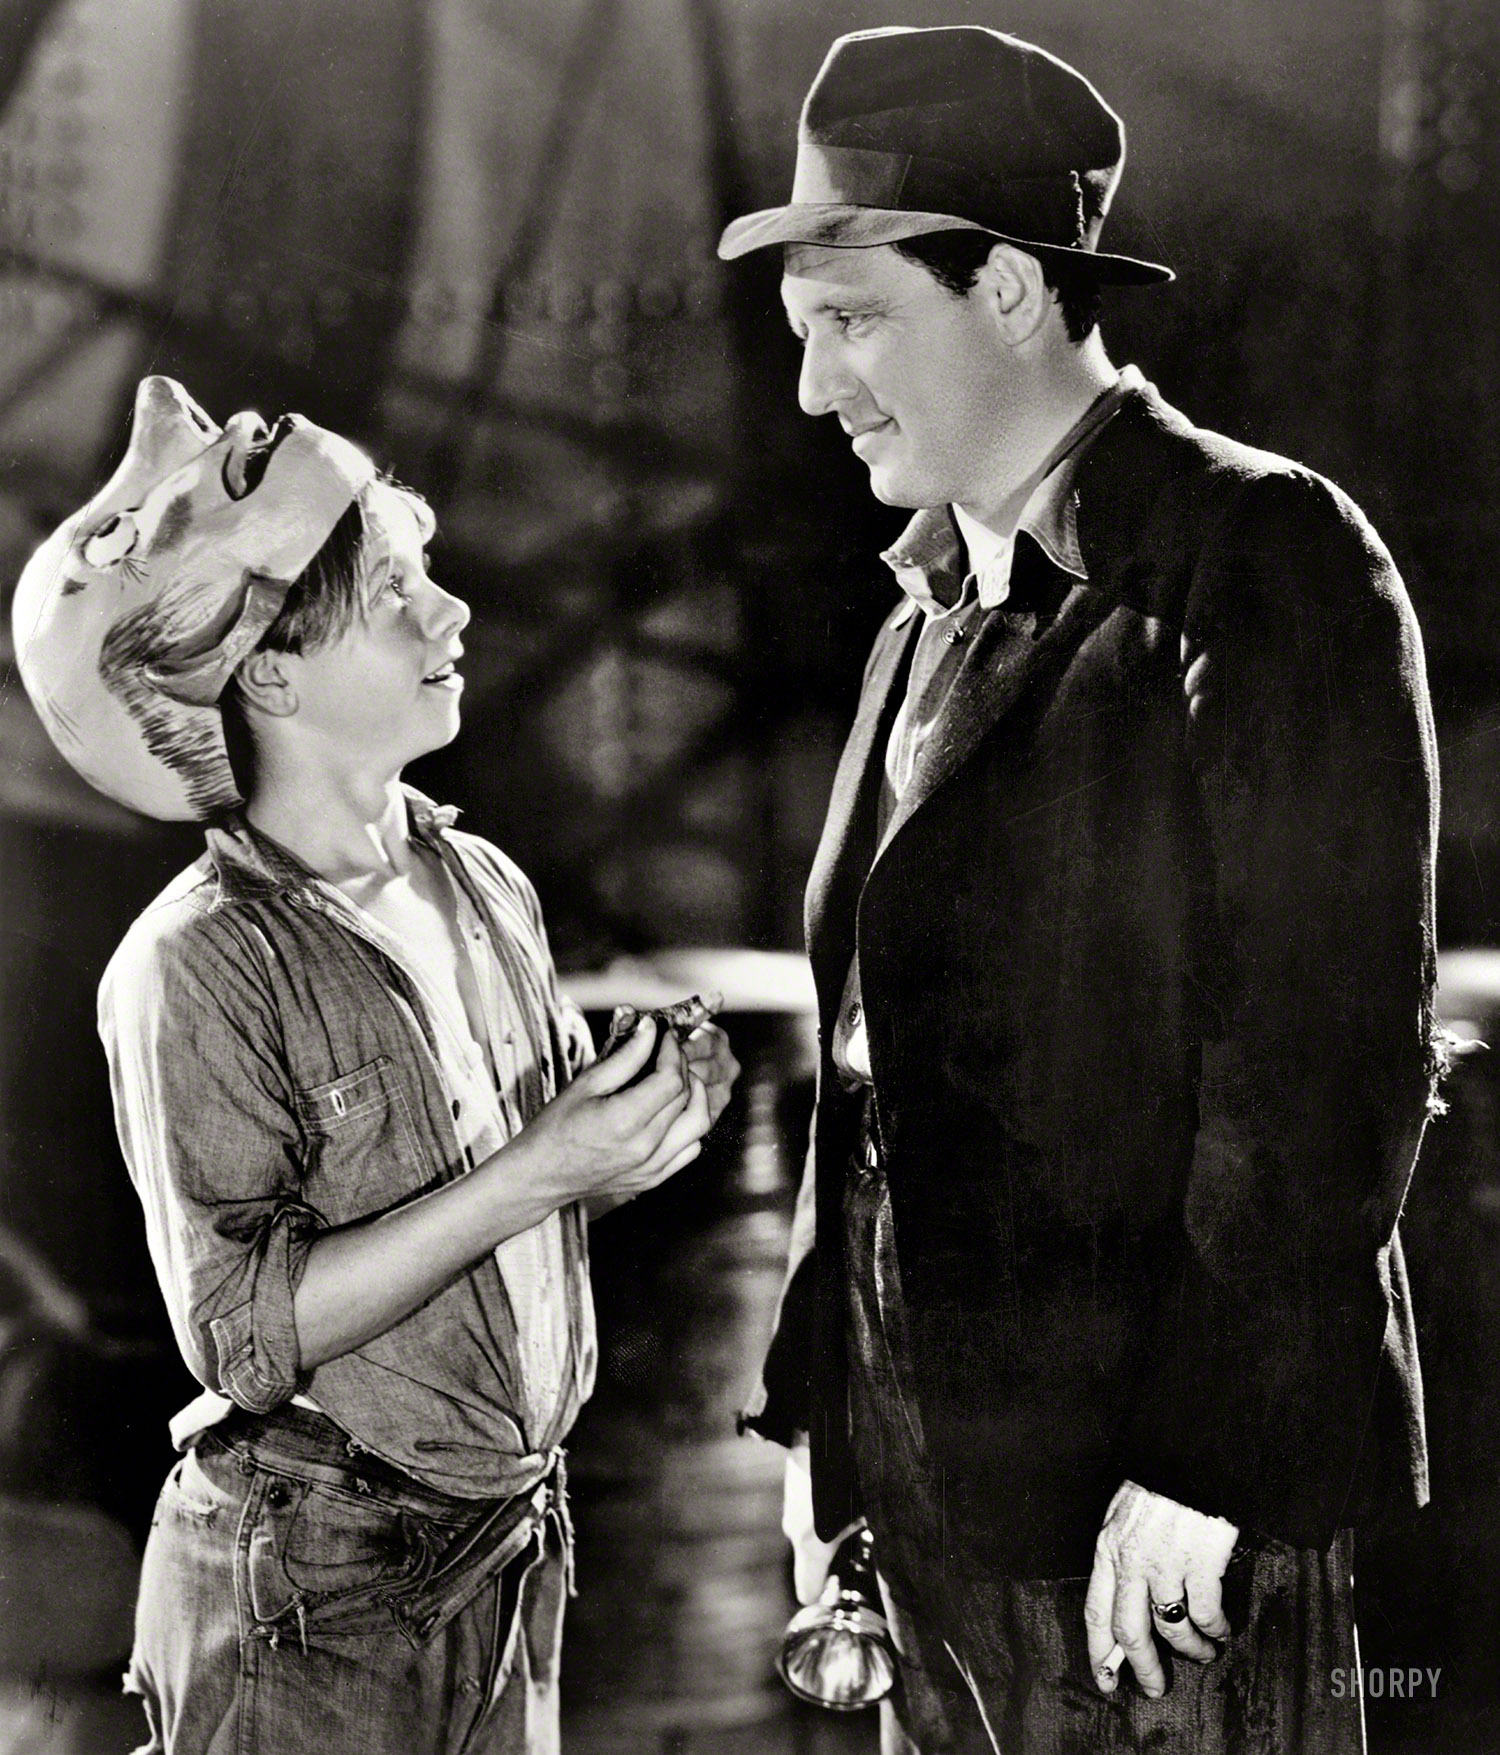 1936. "Mickey Rooney and Spencer Tracy in the film Riffraff." The former child star and Hollywood icon died yesterday at age 93, rolling credits on a career that spanned two centuries. MGM publicity photo. View full size.